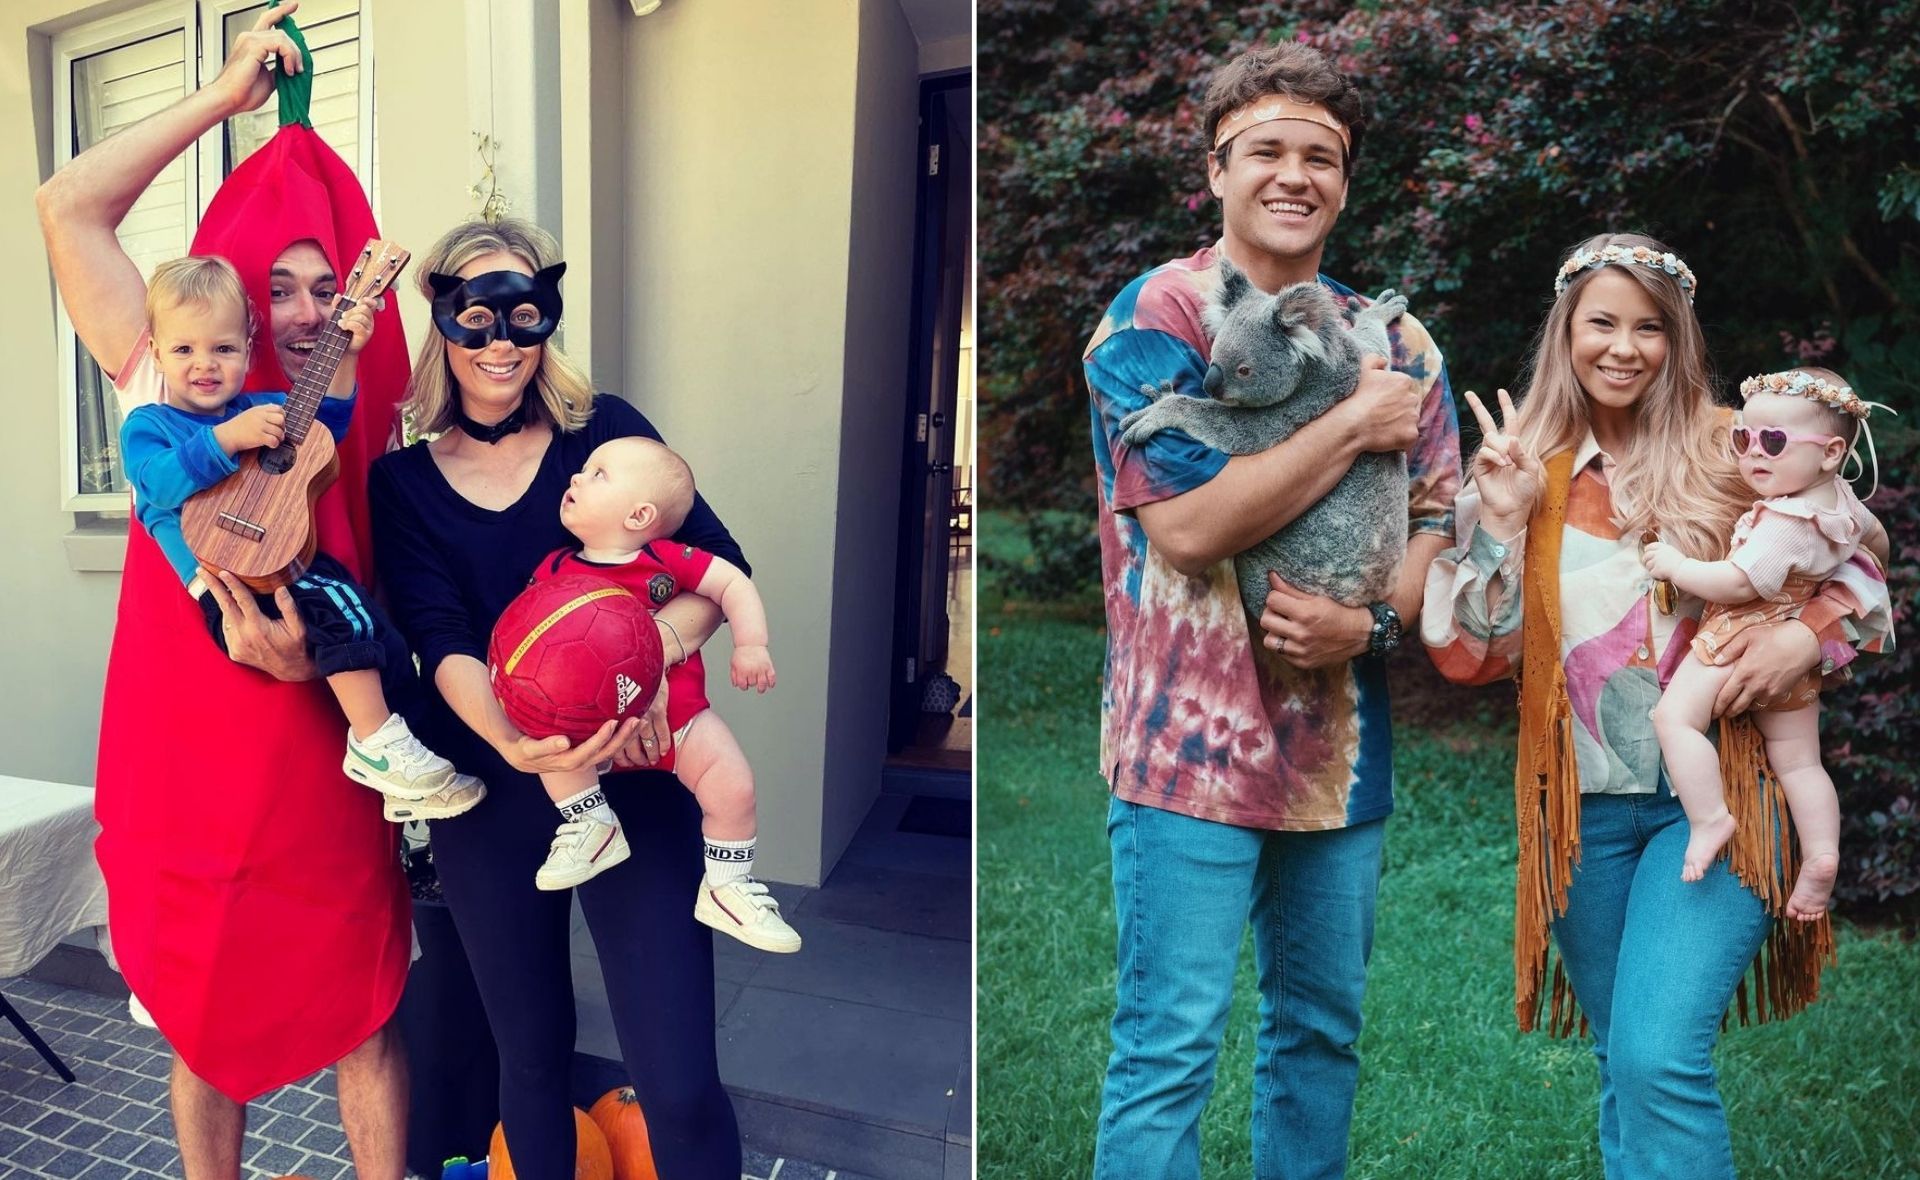 The best celebrity costumes! Everyone’s getting into the Halloween spirit